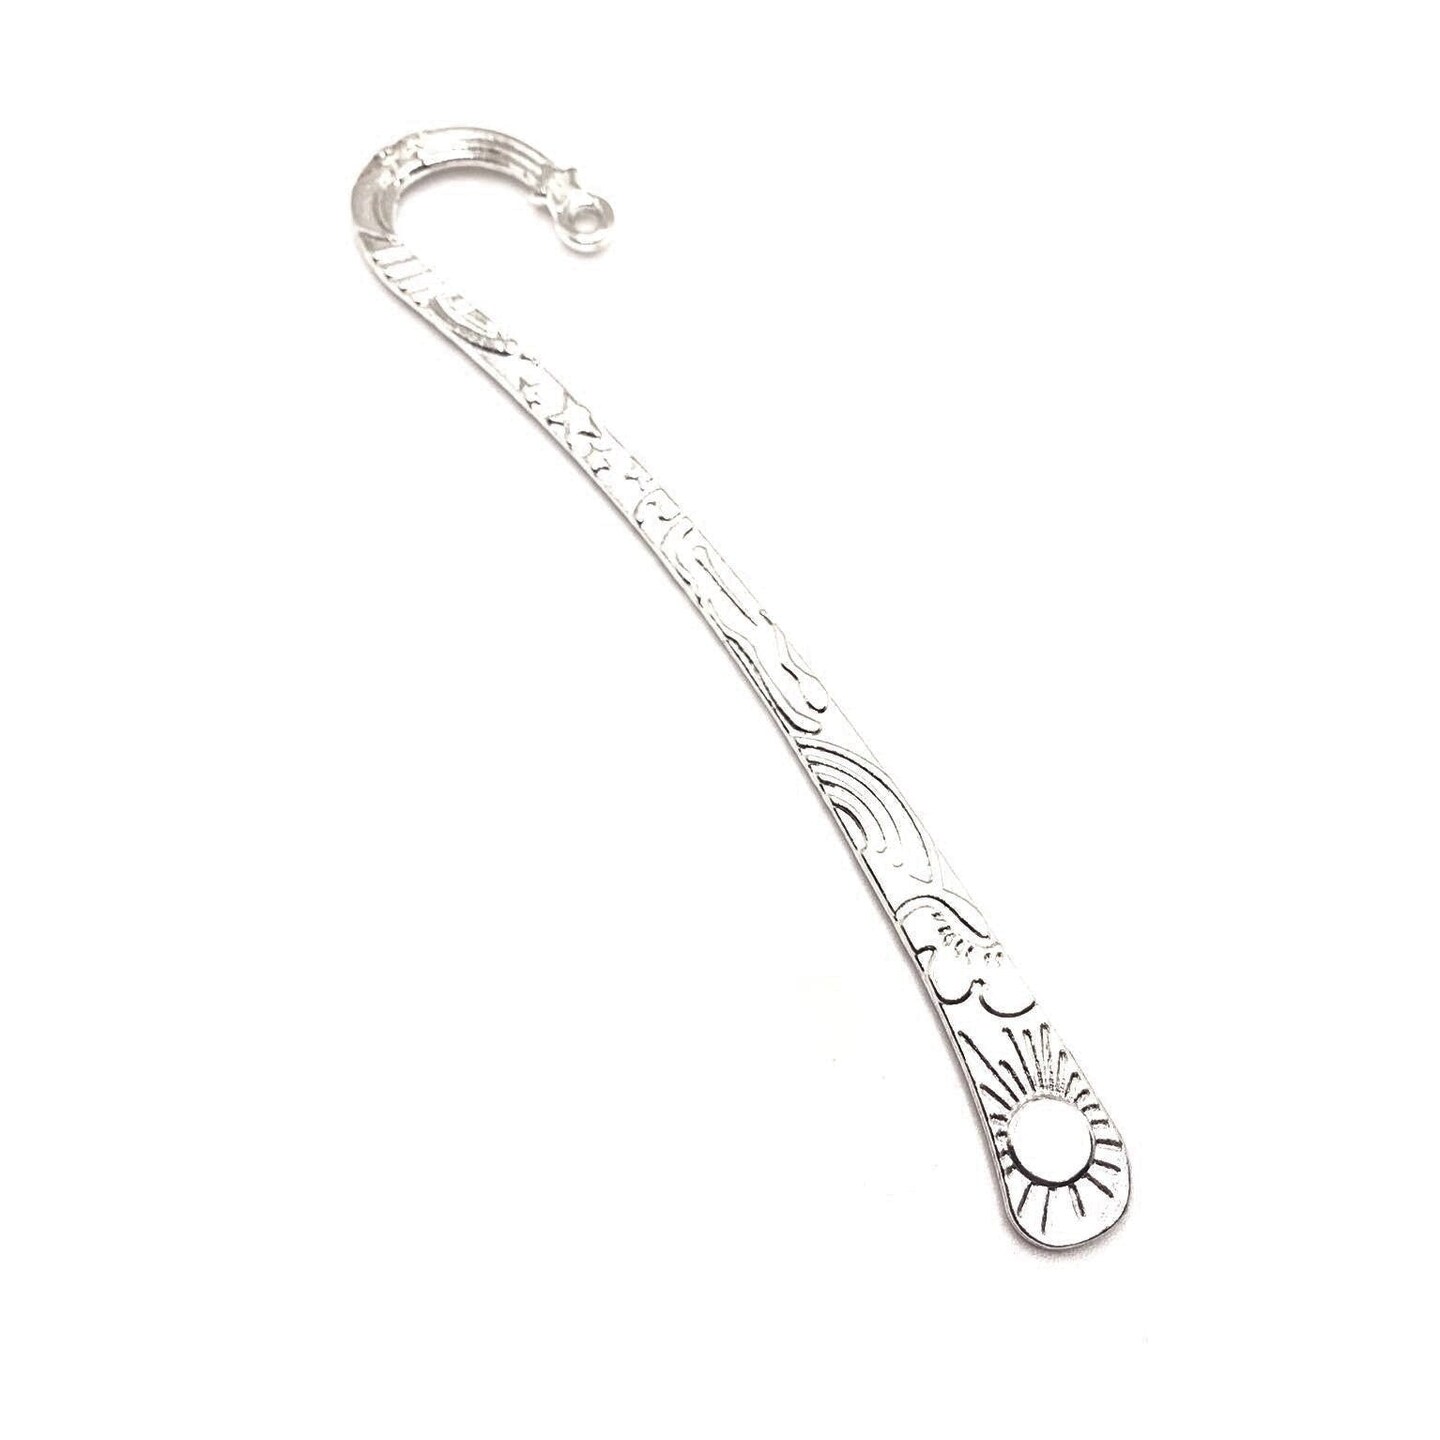 1, 4 or 20 Pieces: Silver Plated Sun and Moon Bookmark Base